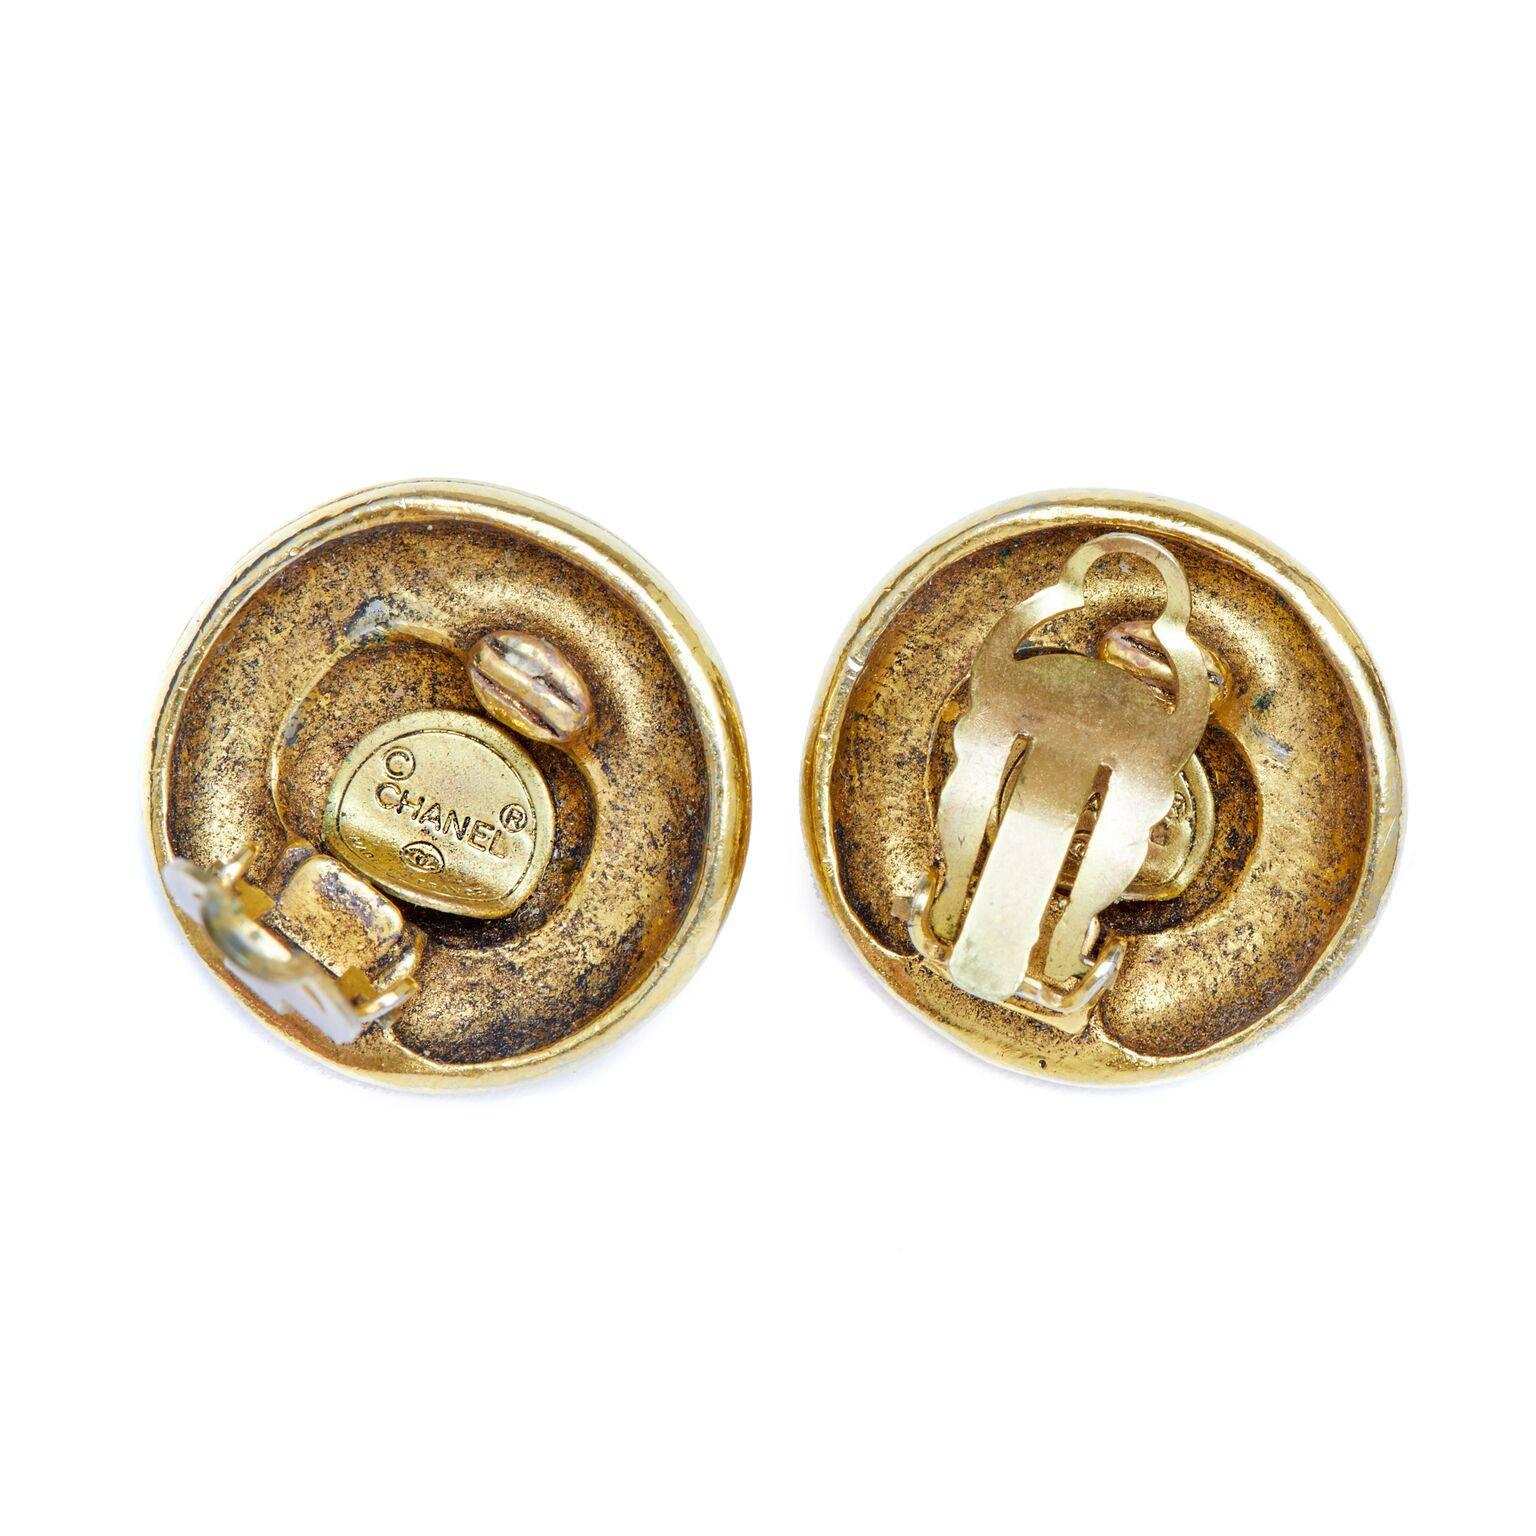 These classic Chanel 1970s or early 1980s gold earrings are of superb quality and condition. An oversized round cut rhinestone encased at the centre of each piece is surrounded by a rope motif in gold plated metal. There are clip-on fastenings at